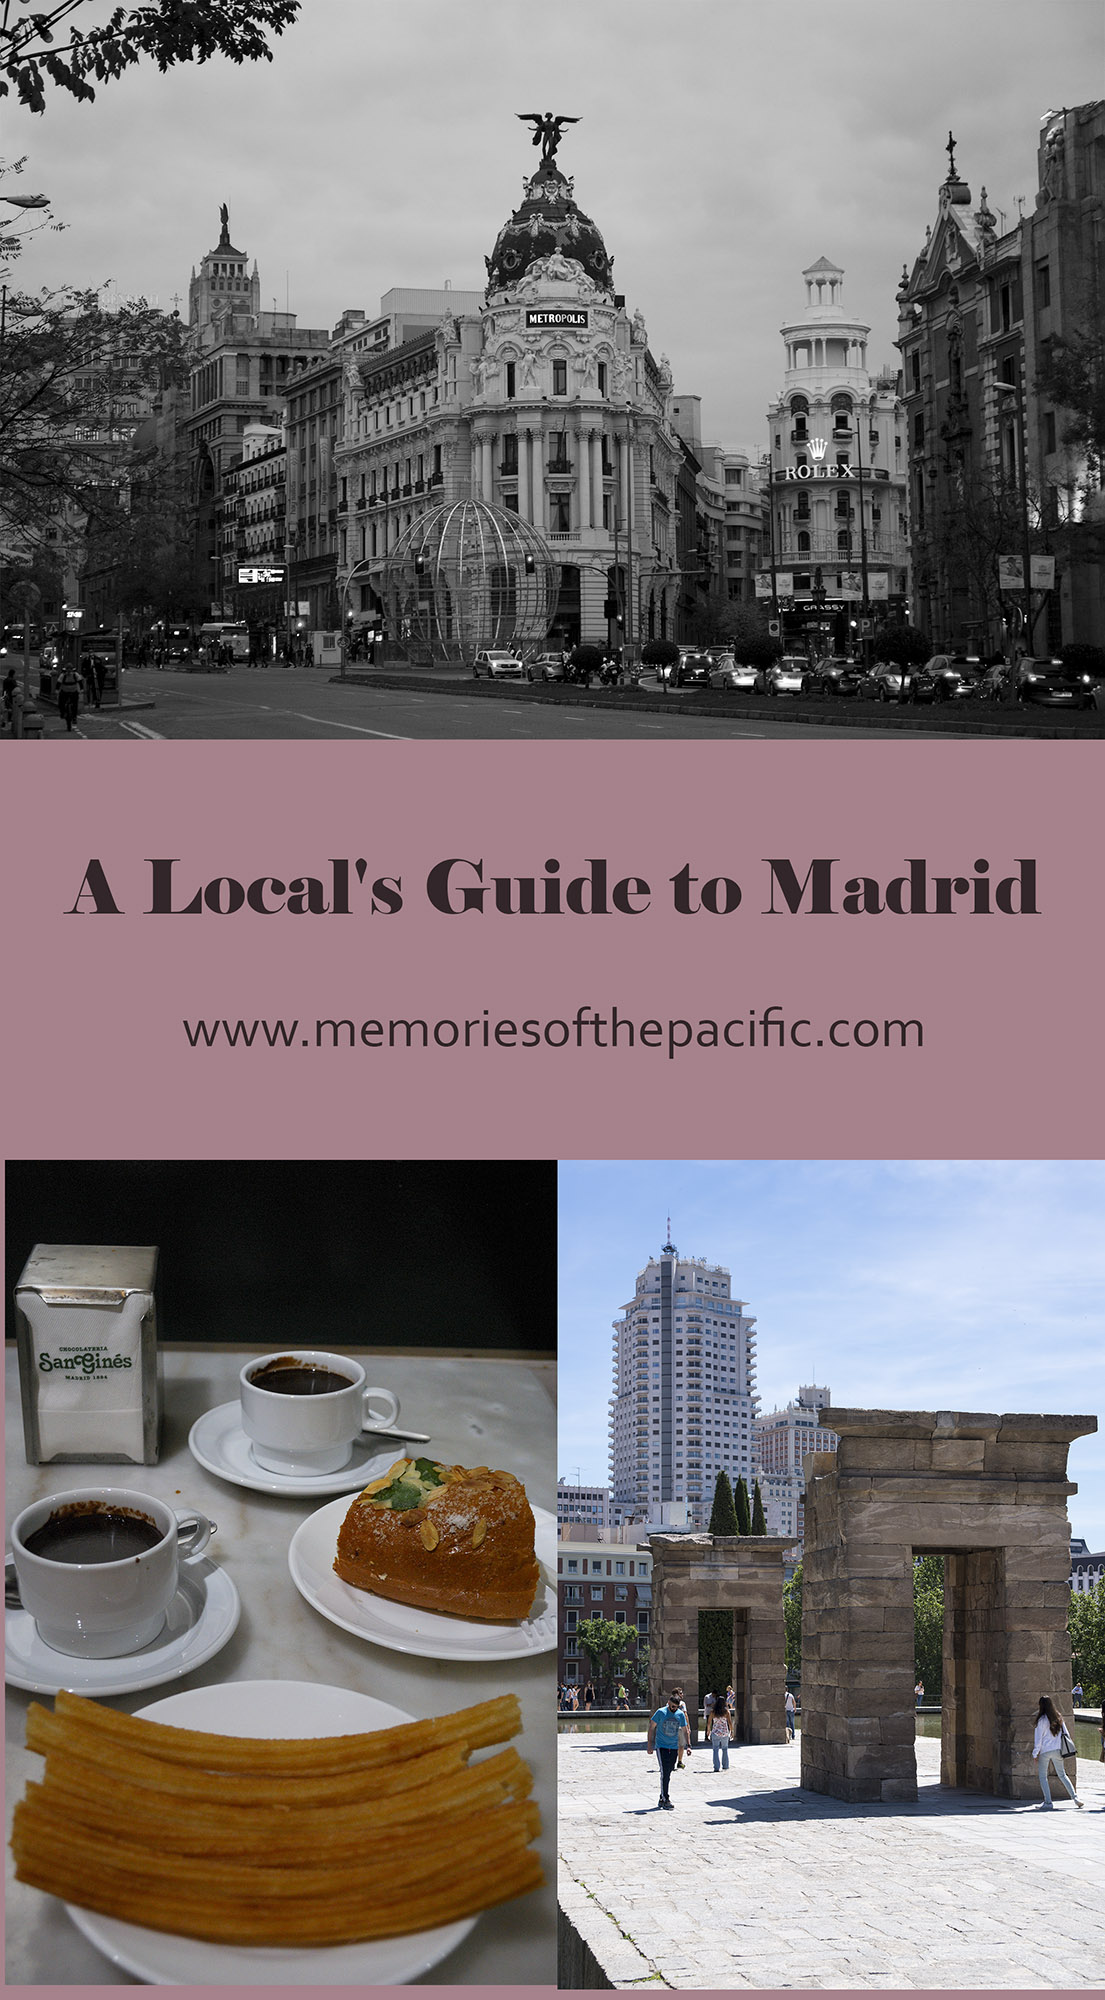 City Guide - Madrid City Guide for Visitors and Locals